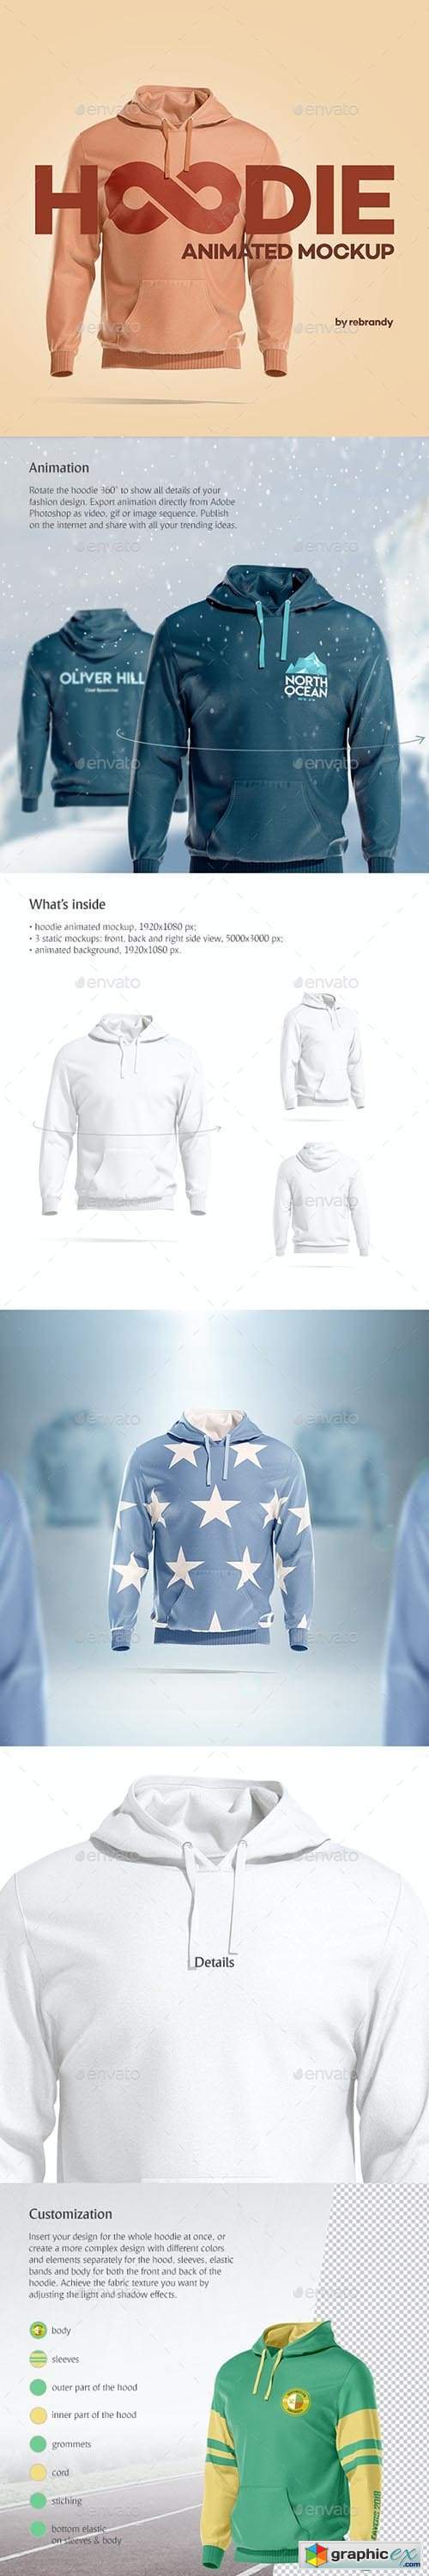 Download Hoodie Animated Mockup Free Download Vector Stock Image Photoshop Icon